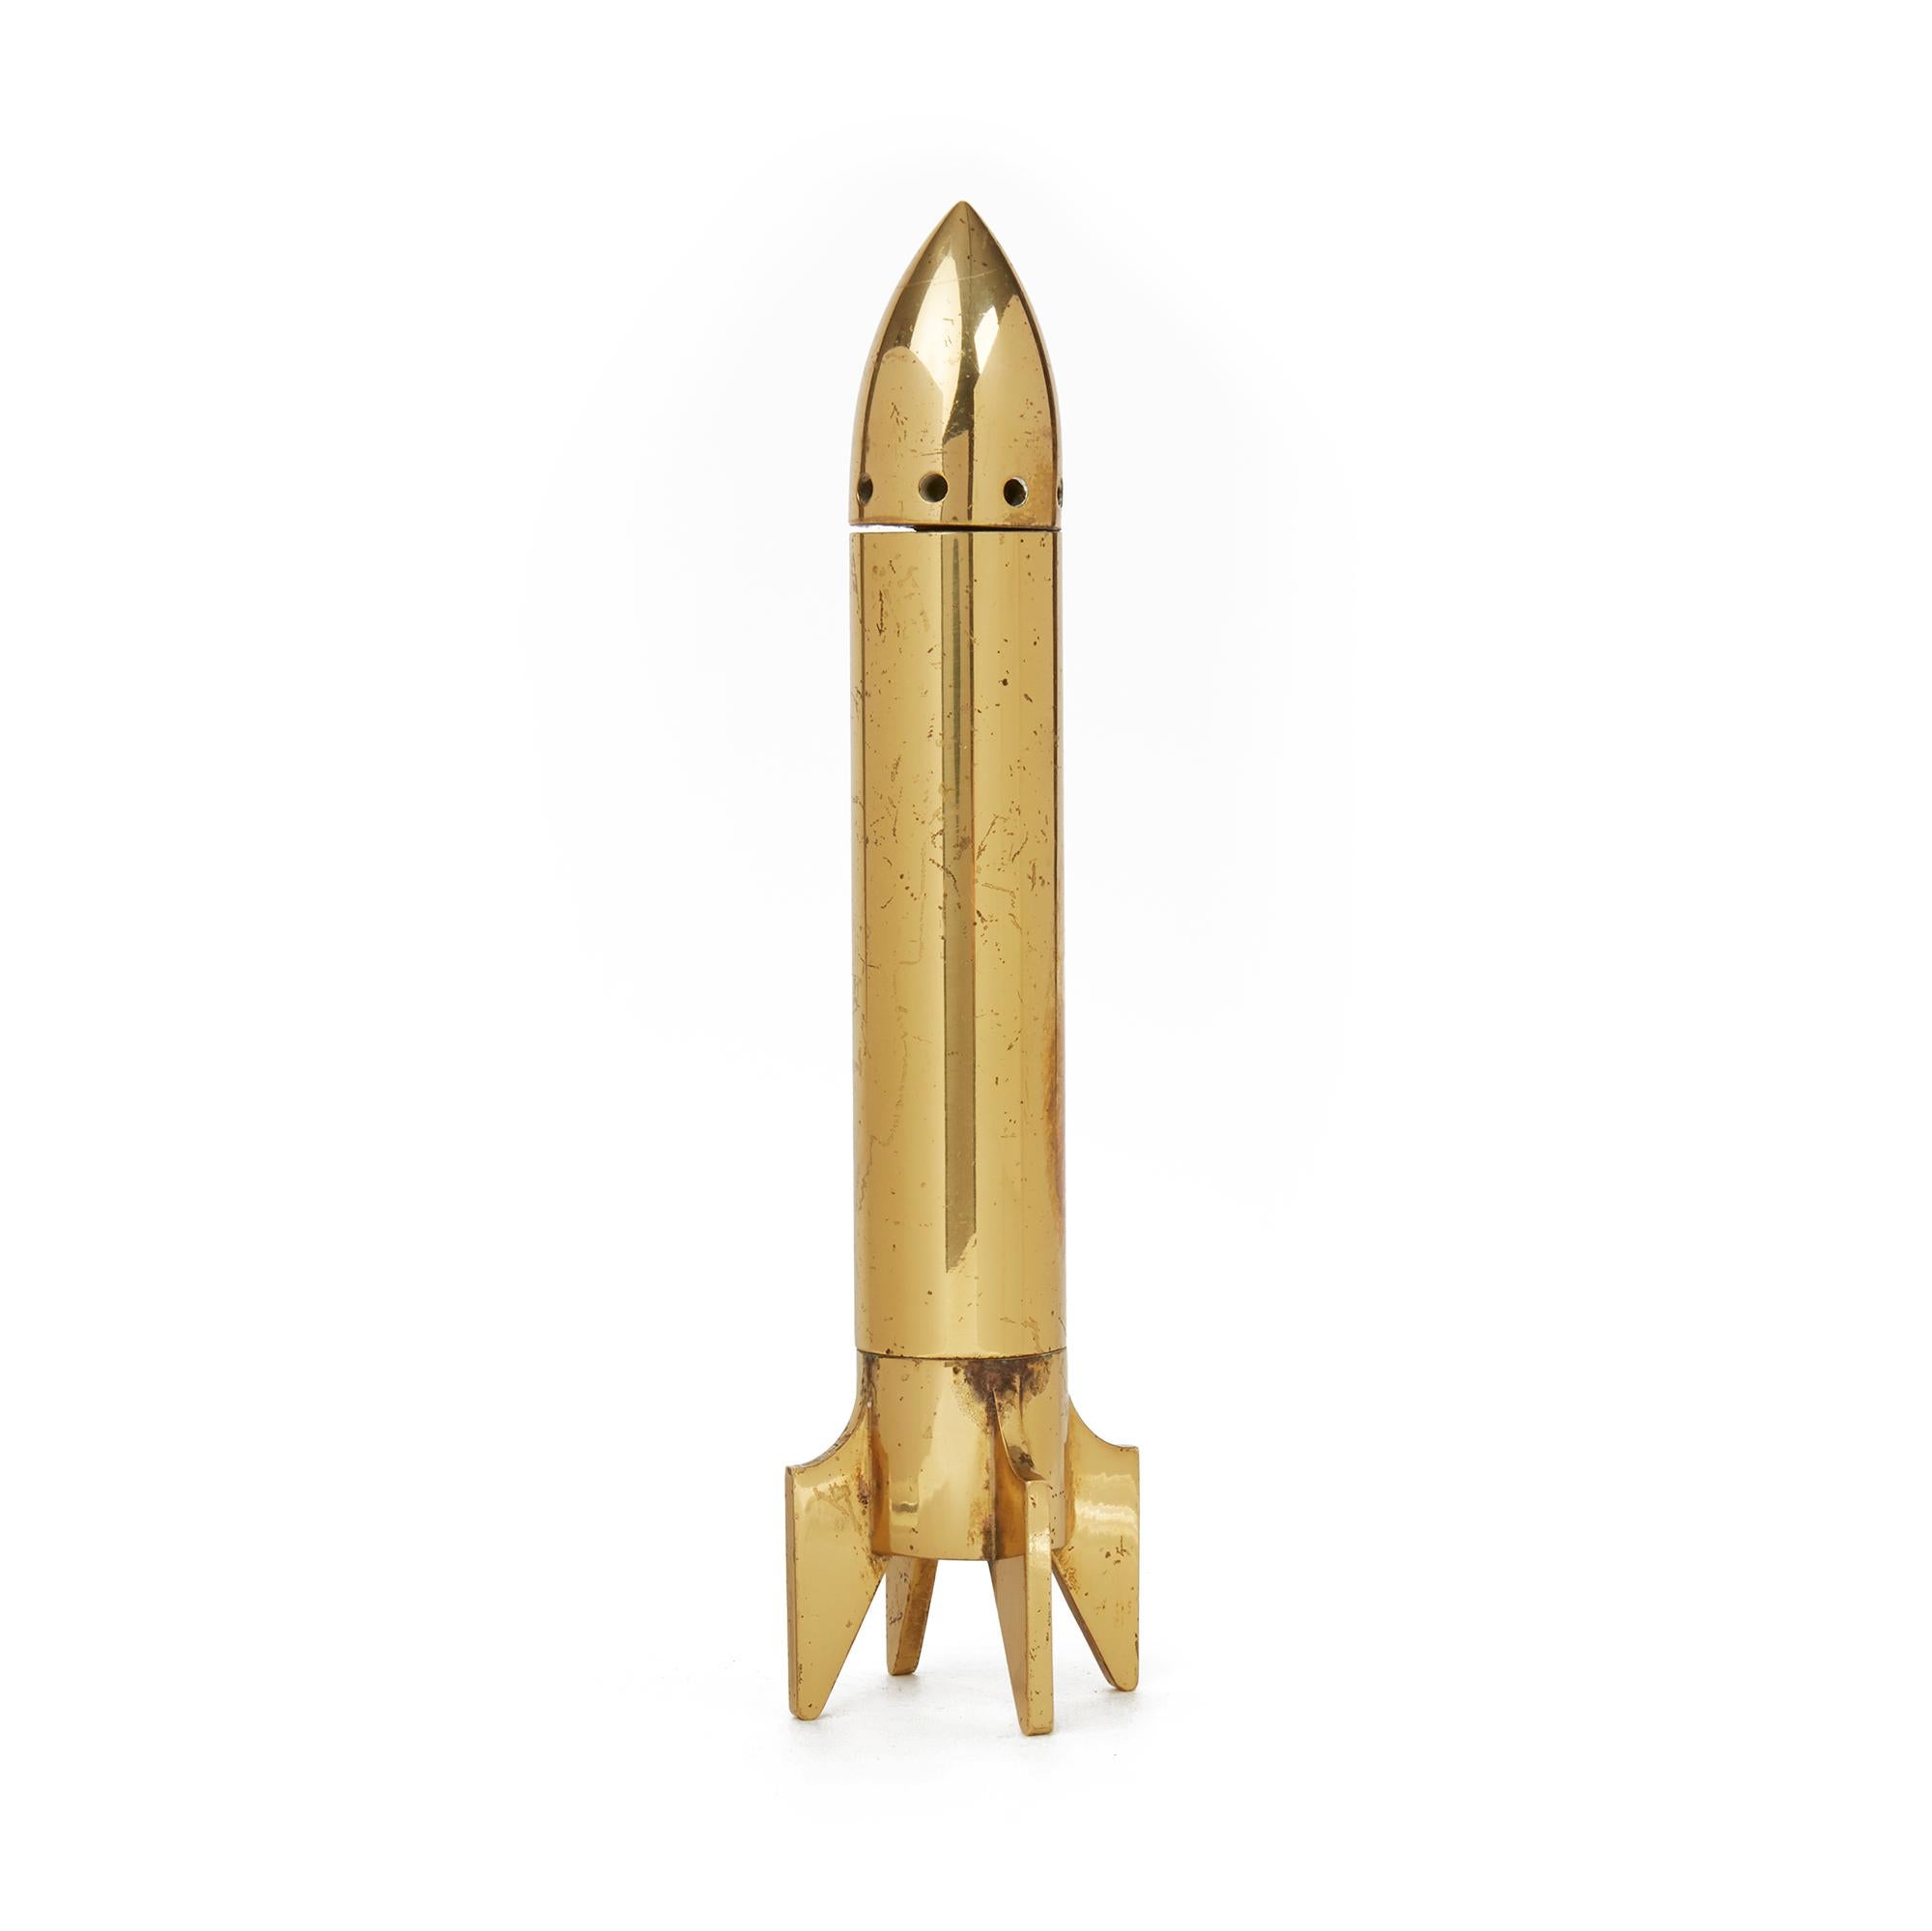 A very stylish Italian midcentury solid brass corkscrew and bottle opener housed in a rocket. The rocket stands upright on its four tail fins which also unscrew to reveal a corkscrew while the nose cone unscrews to reveal a bottle opener. The rocket